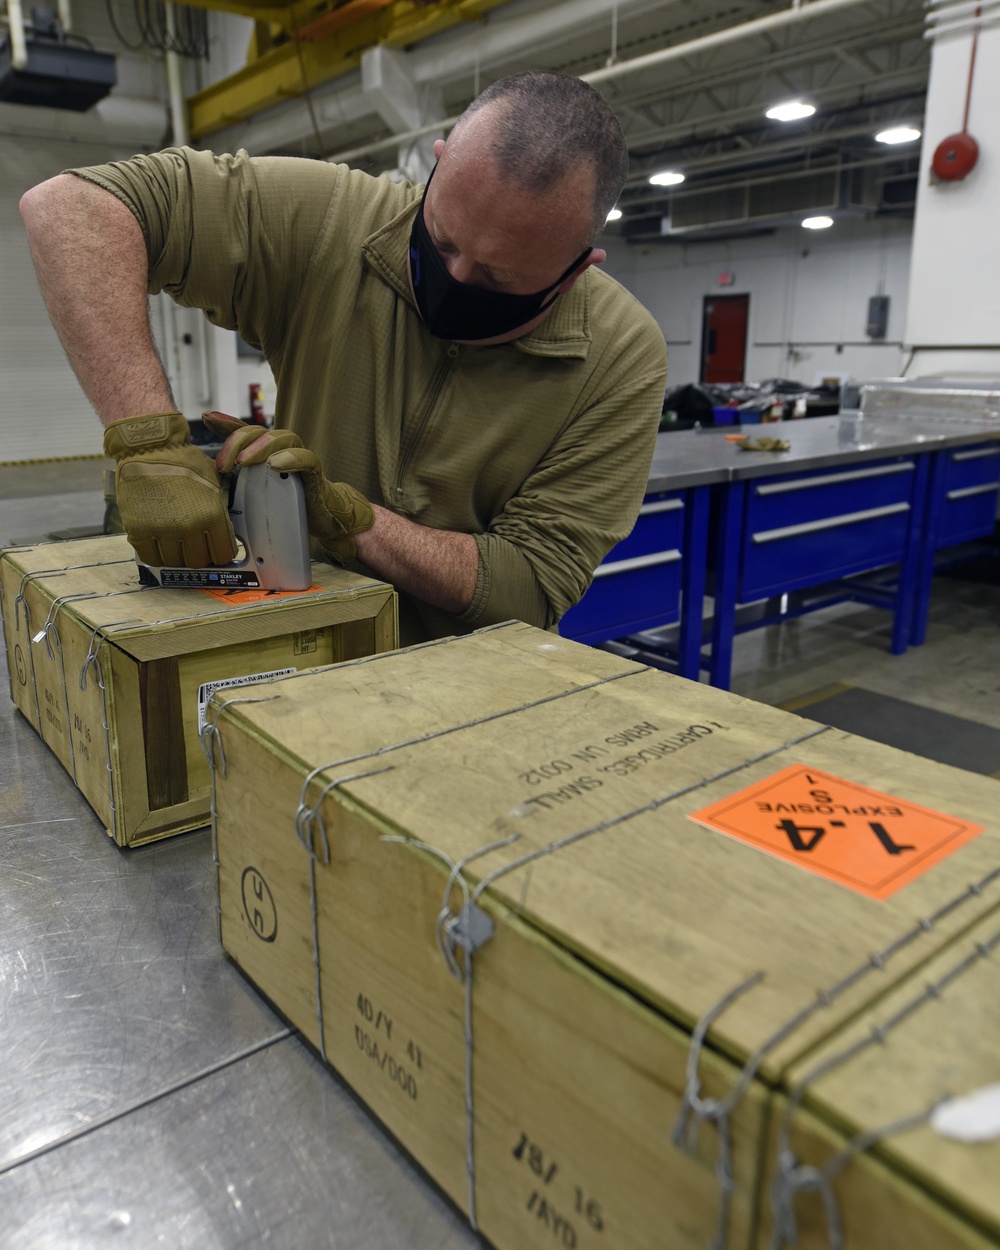 88 Operations Support Squadron Munitions Flight supplies the boom for defenders and others.